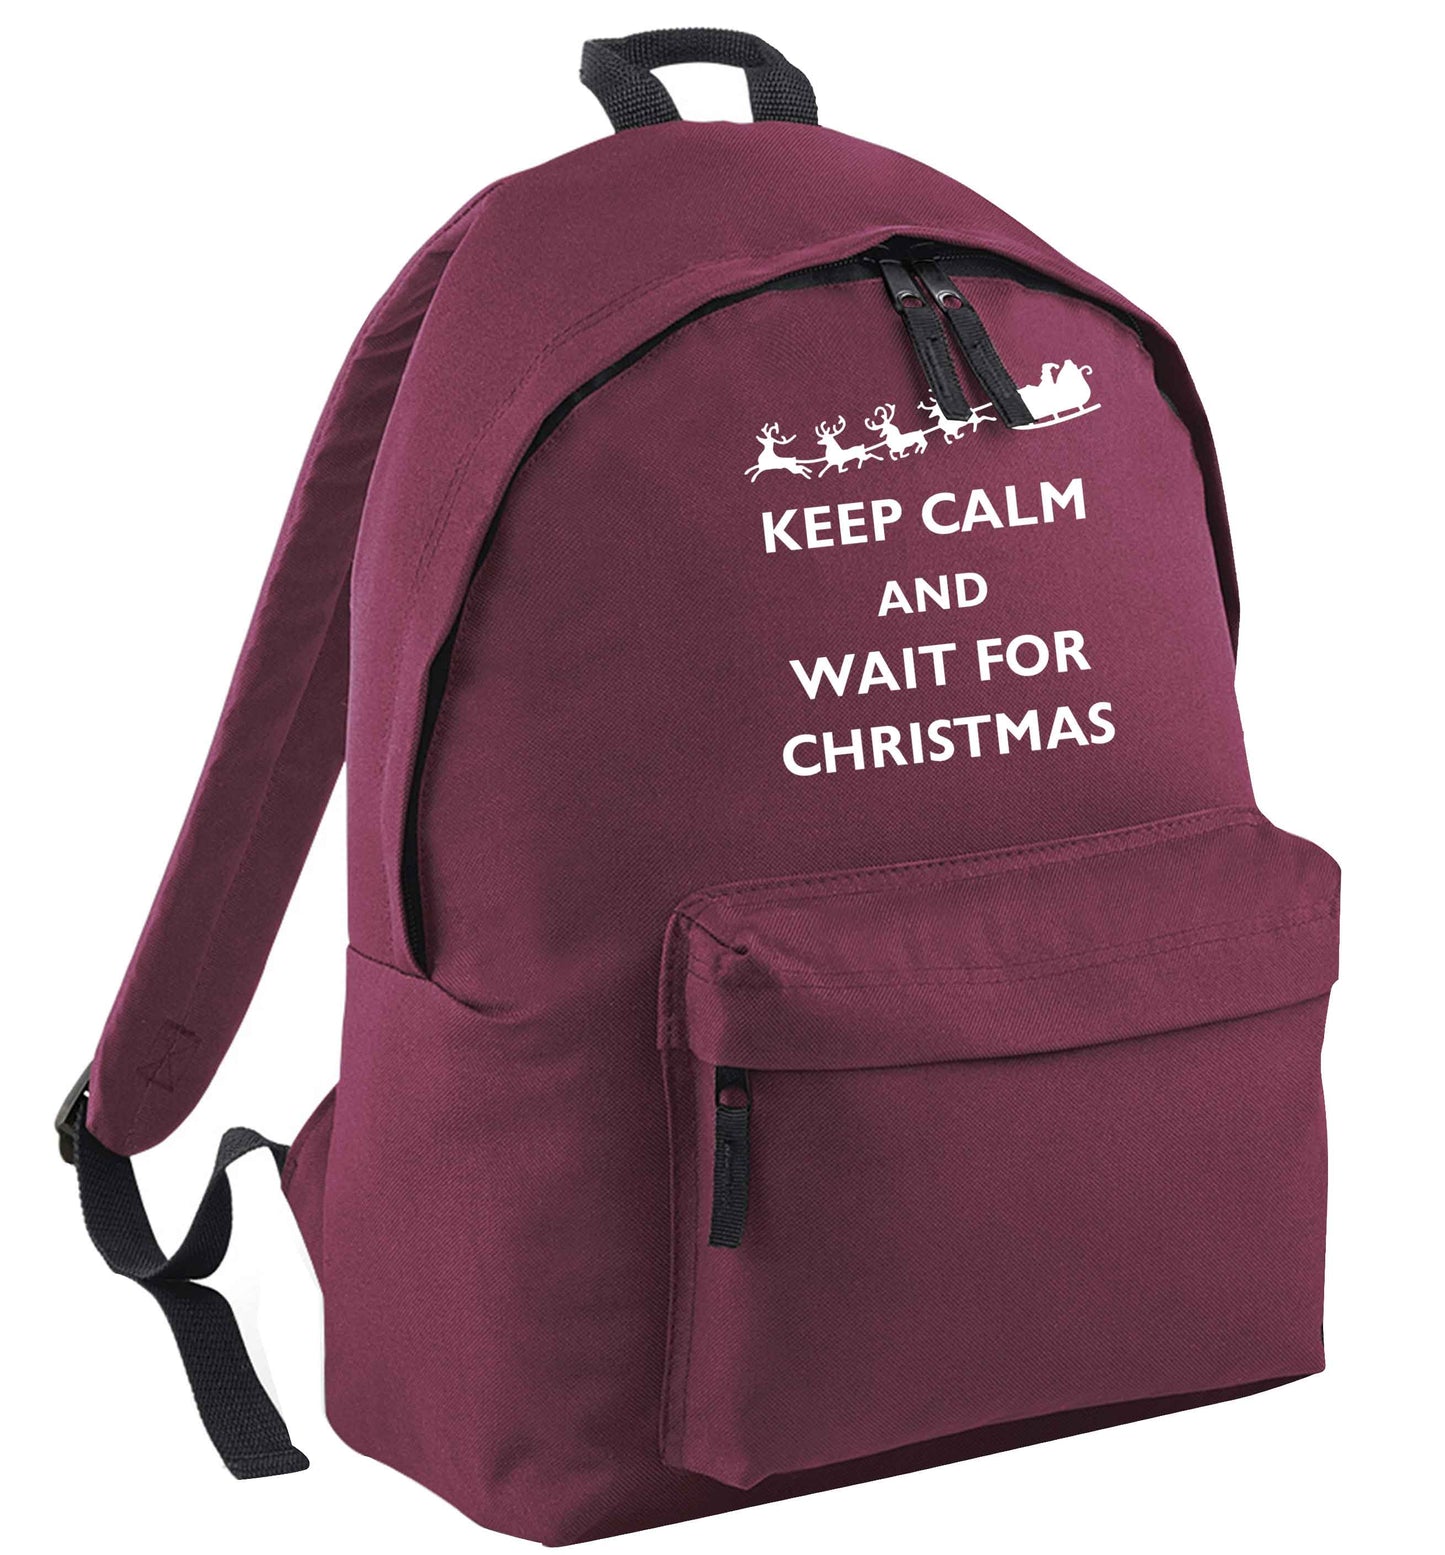 Keep calm and wait for Christmas maroon adults backpack